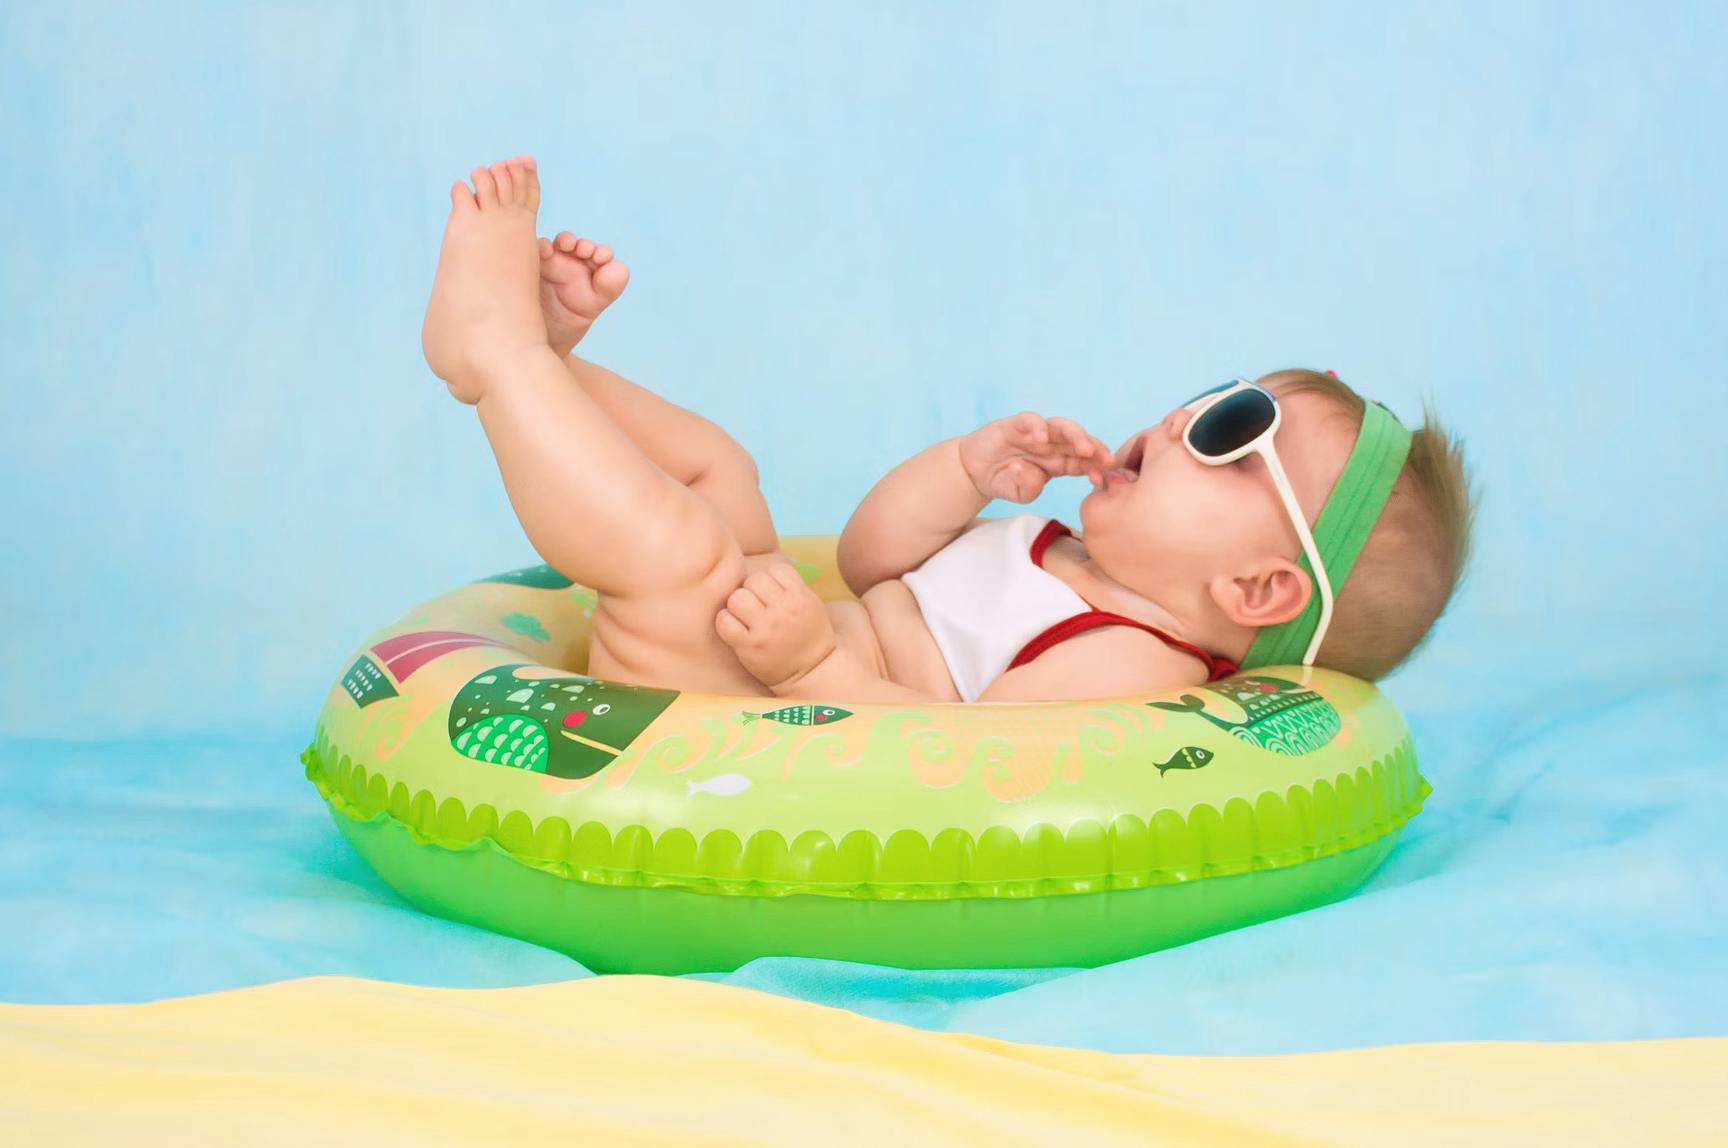 baby wearing sunglasses relaxing on a pool float